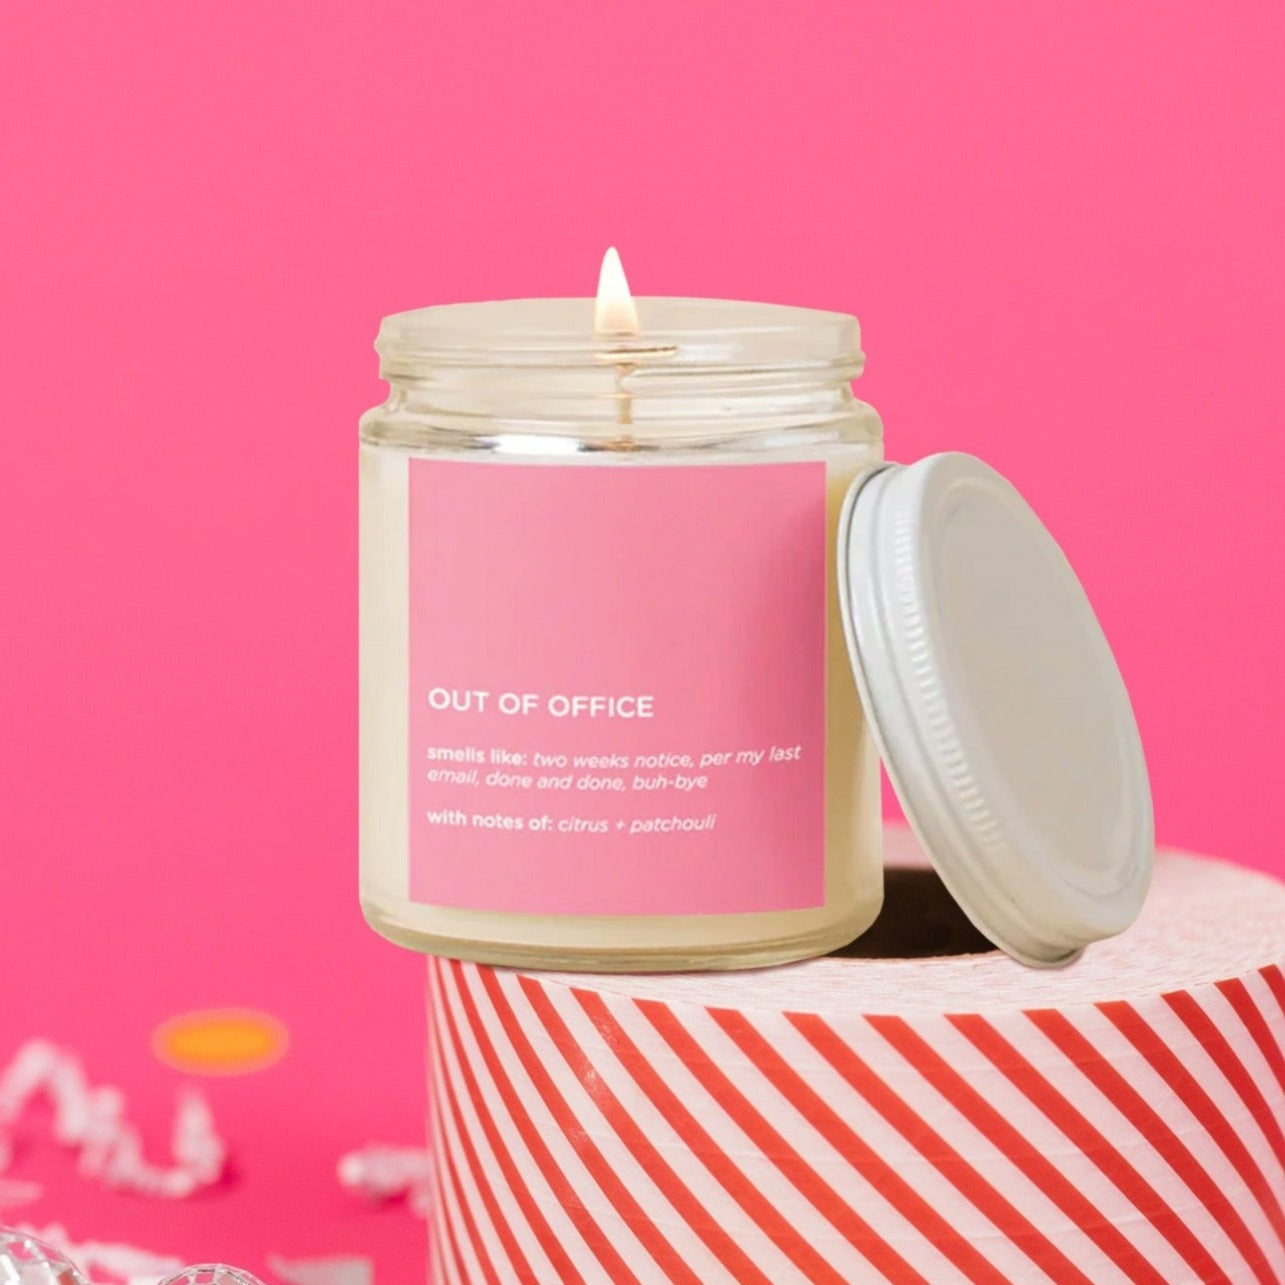 On a hot pink background sits candle and a lid. There are white crinkle and big, colorful confetti scattered around. The lit glass candle has a bubblegum pink label. It says "OUT OF OFFICE" in all caps, white block font. It says "smells like: two weeks notice, per my last email, done and done, buh-bye," and "with notes of: citrus + patchouli" in white, block font.